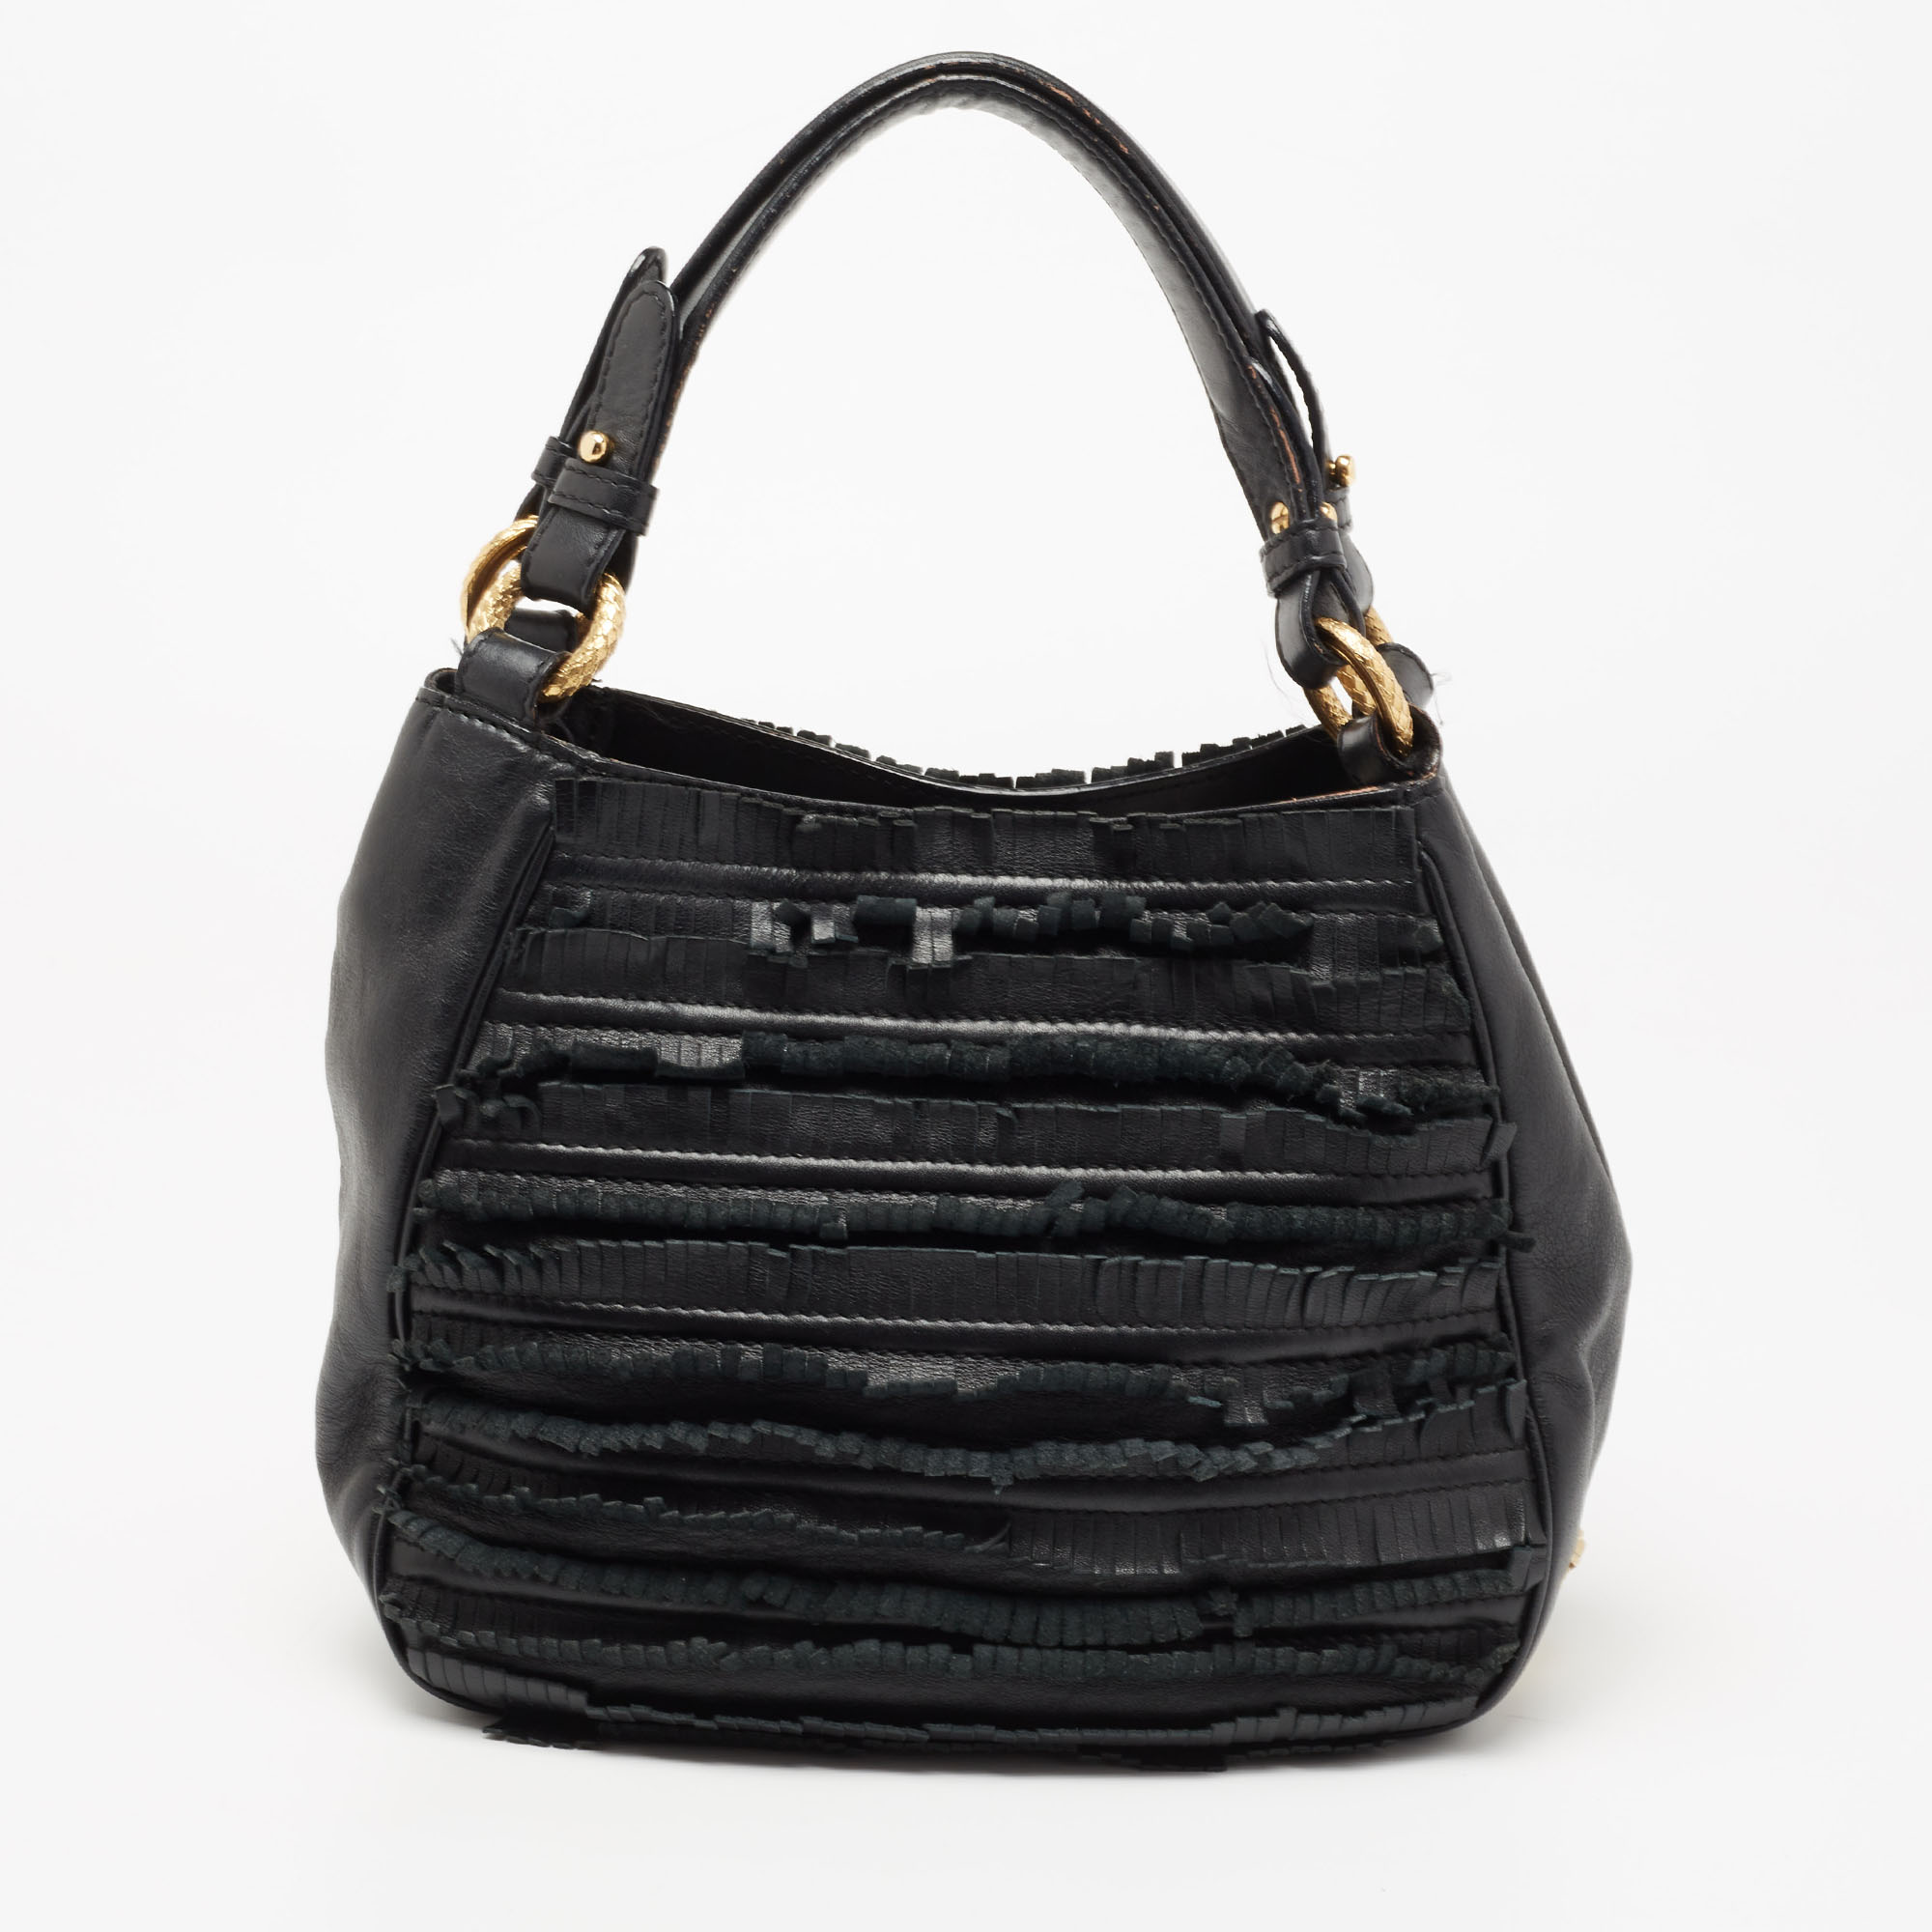 Pre-owned Roberto Cavalli Black Leather Fringed Hobo